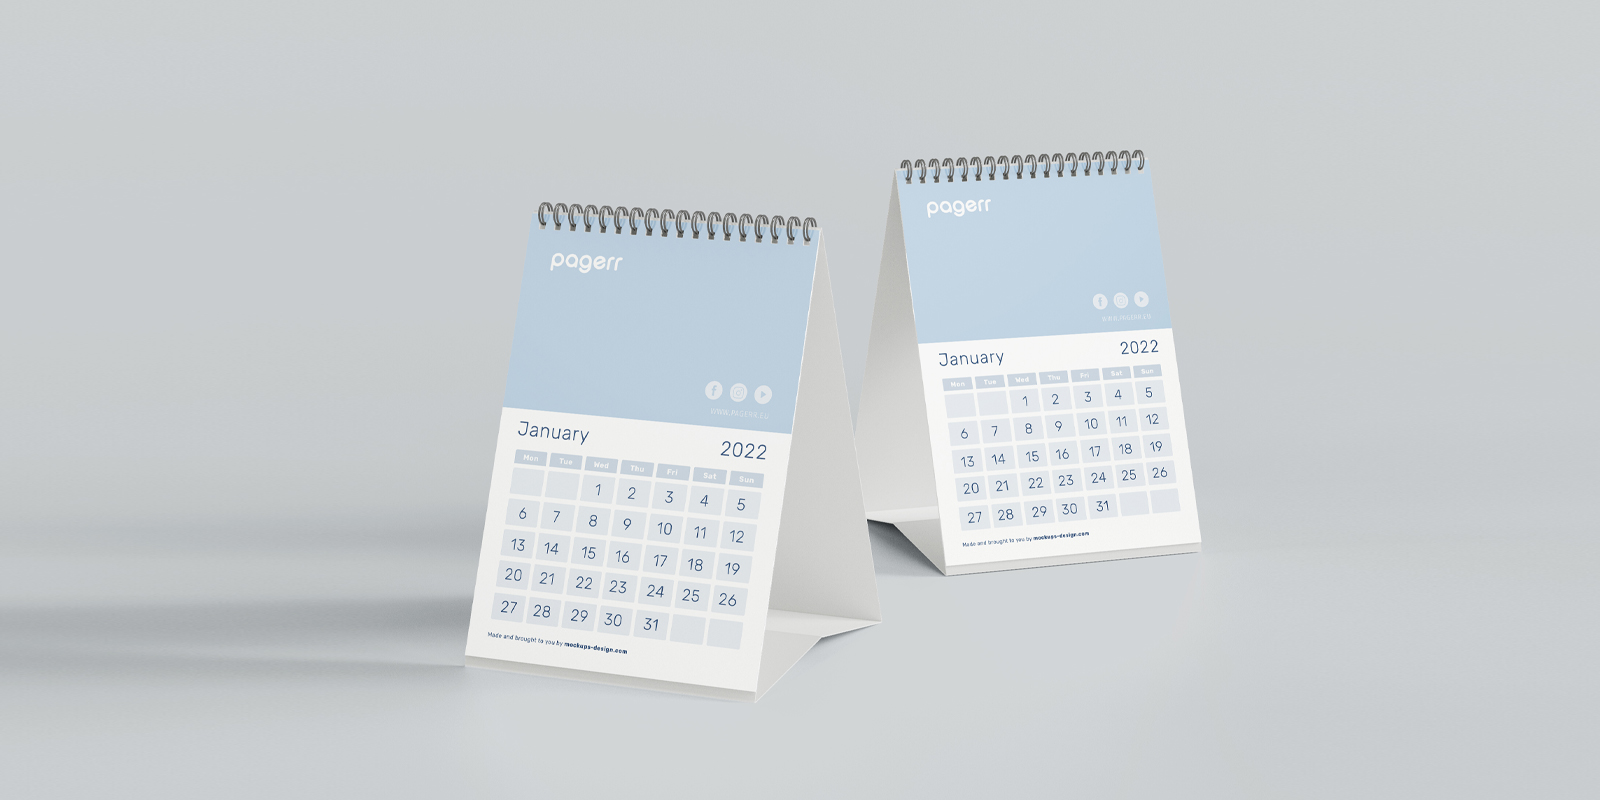 Desk calendars in Barcelona - Print with Pagerr